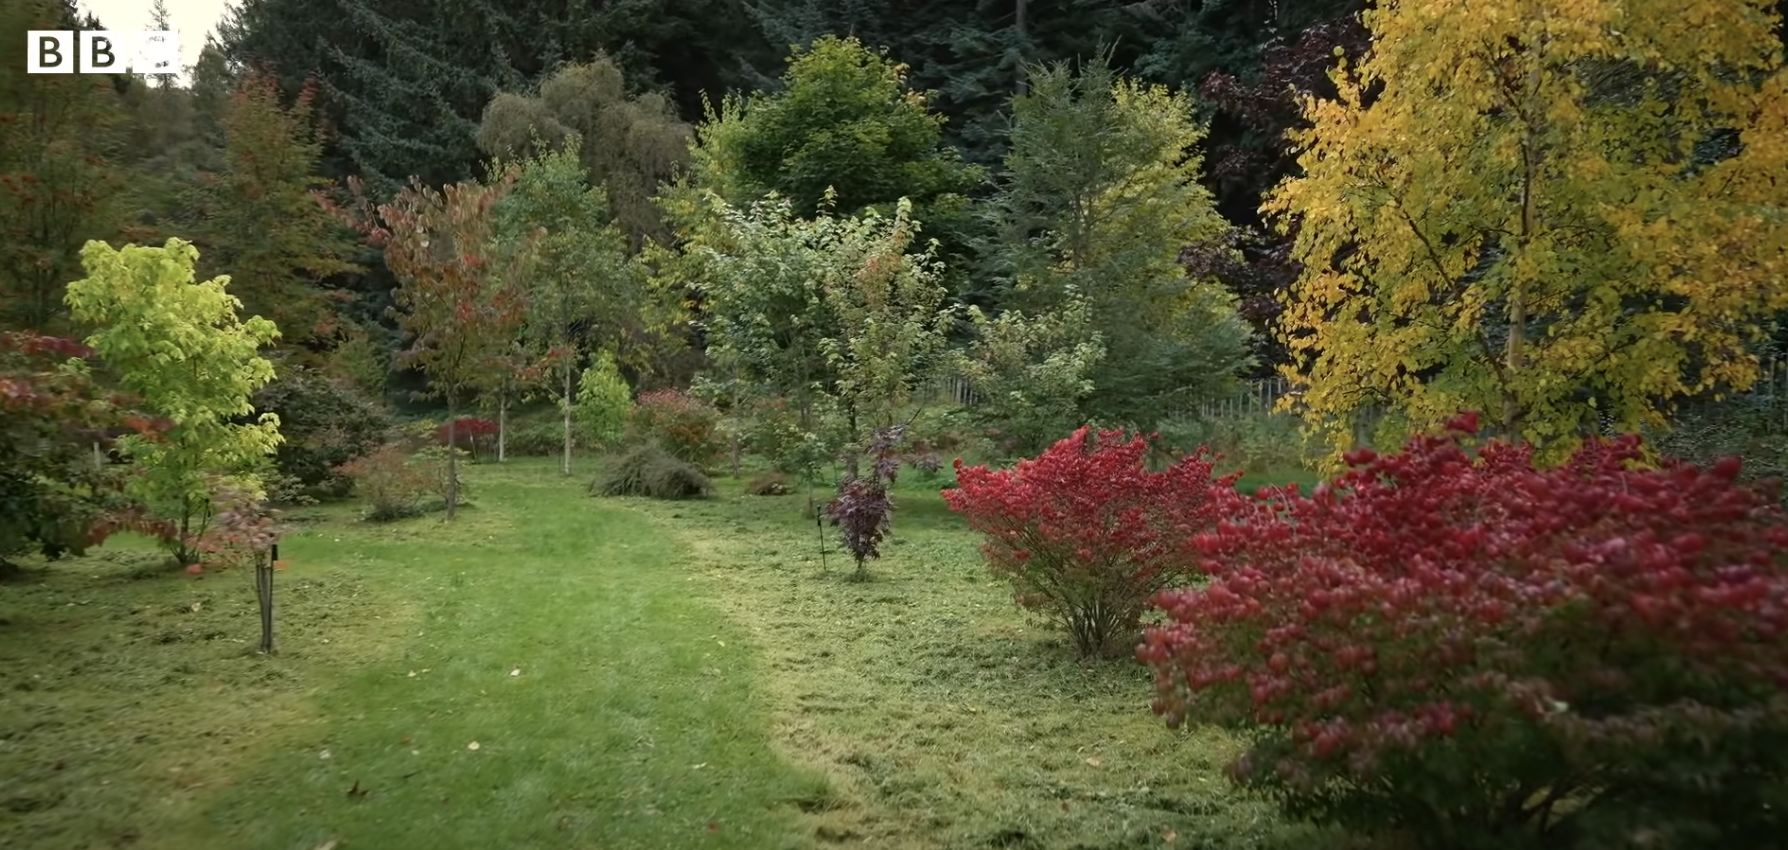 The garden in Balmoral Estate, dated 2022 | Source: YouTube/BBC News